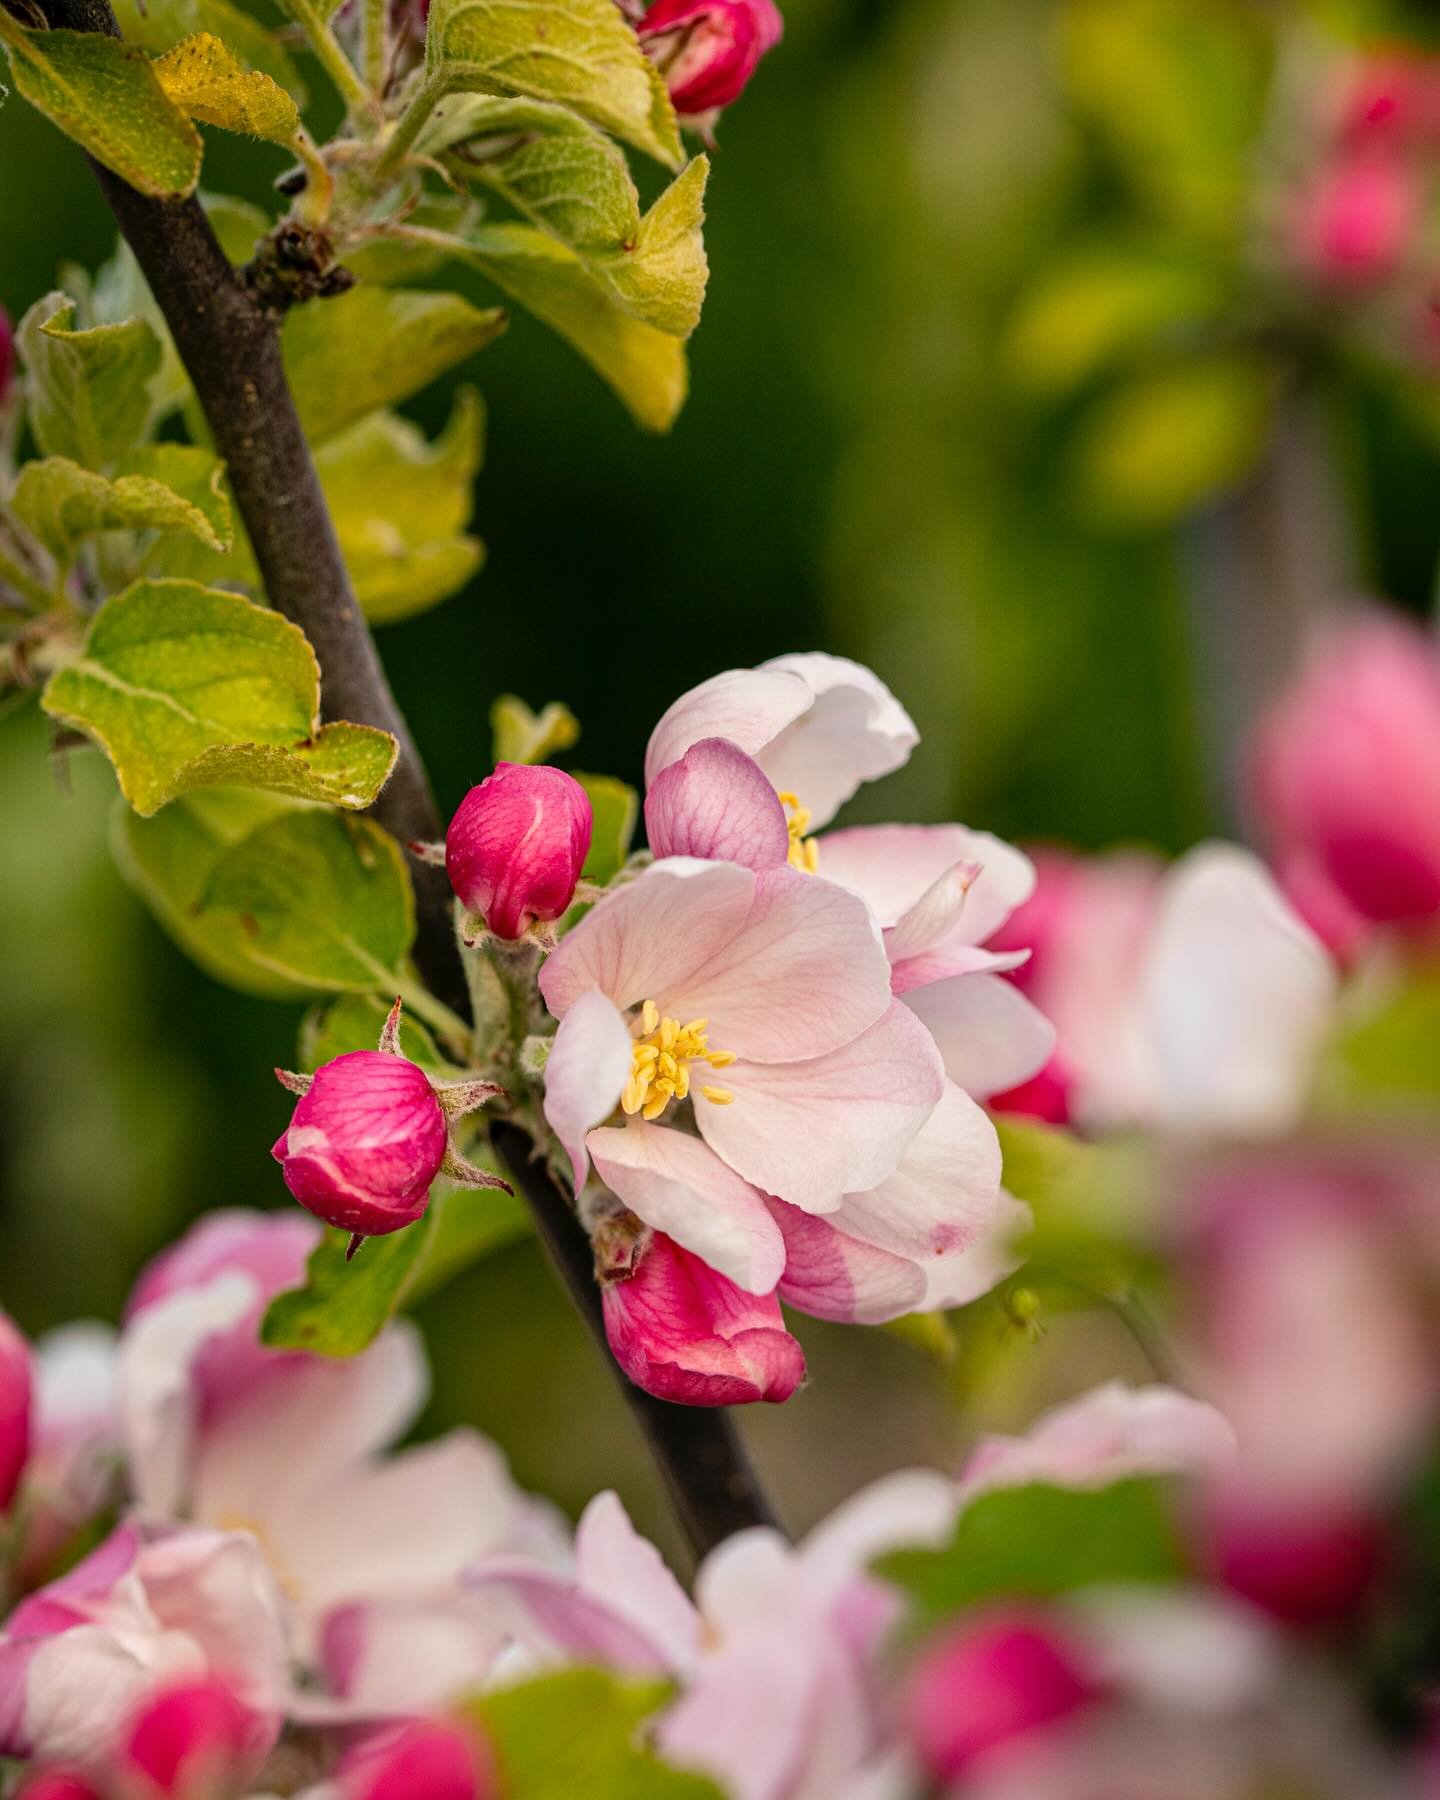 APPLE BLOSSOM 🌸 || Over the past week our pretty little Apple Orchard has been looking magical in the most incredible blossom. ⁠⠀
⁠⠀
The bees are working very hard pollinating the trees, which ensures we have apples in the Autumn! 
🐝➡️🌸➡️🍎 

Thes